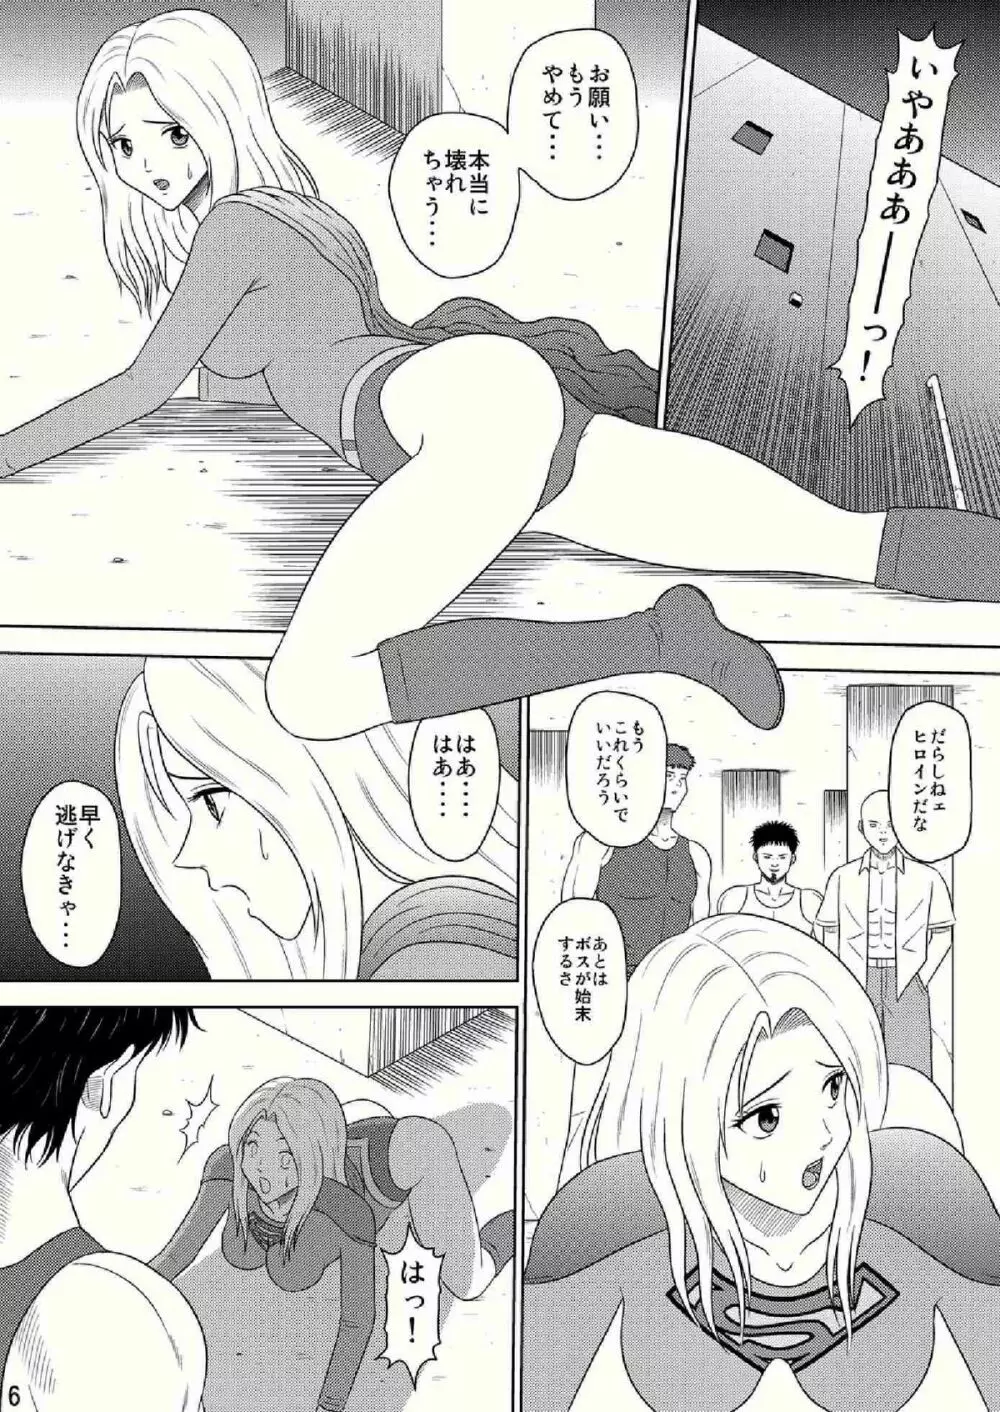 Toukikoubou vol.2 SUPER GIRL - Humiliation and Execution - Page.6